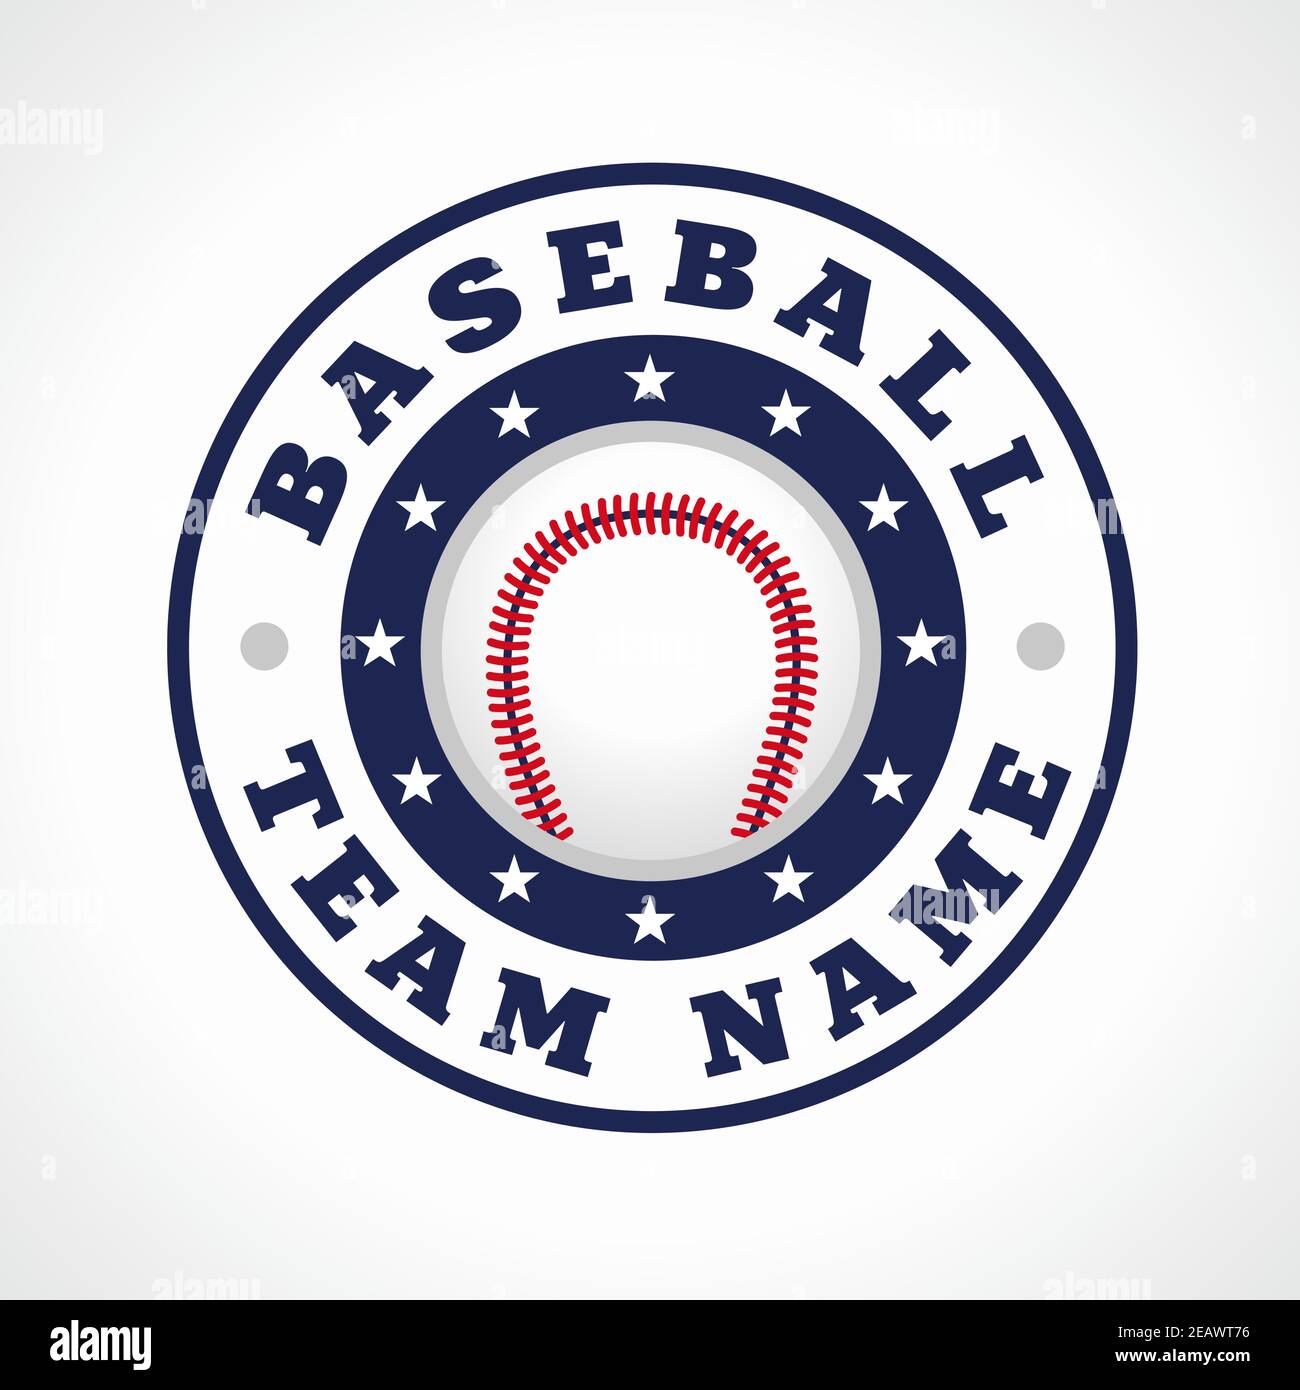 Baseball vector logo. Branding symbol of teams, national competitions, union, matches, leagues or sport equipment shop. Children's schools, kid's spor Stock Vector